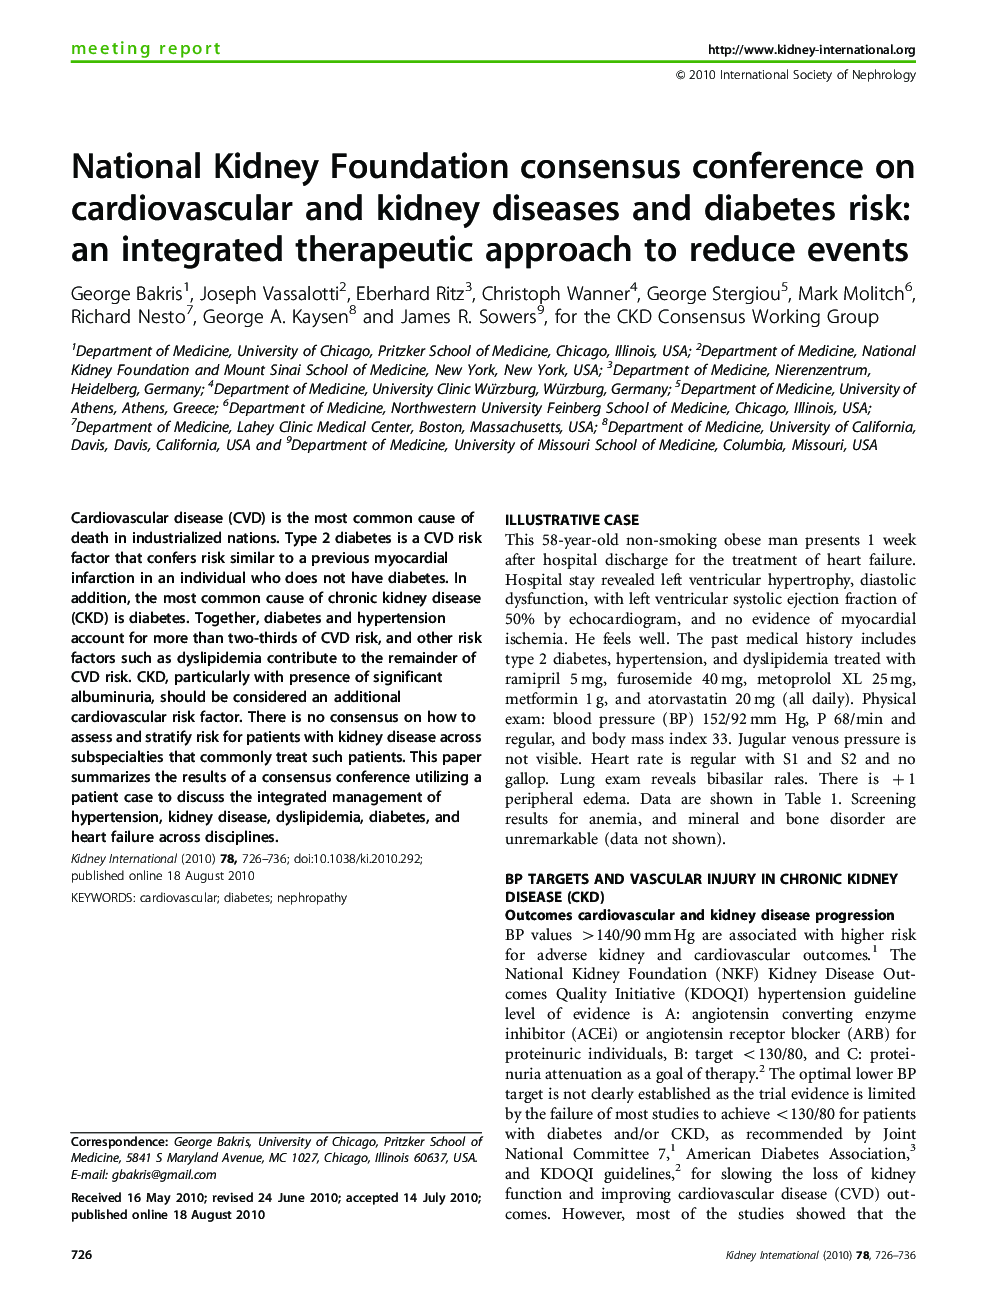 National Kidney Foundation consensus conference on cardiovascular and kidney diseases and diabetes risk: an integrated therapeutic approach to reduce events 